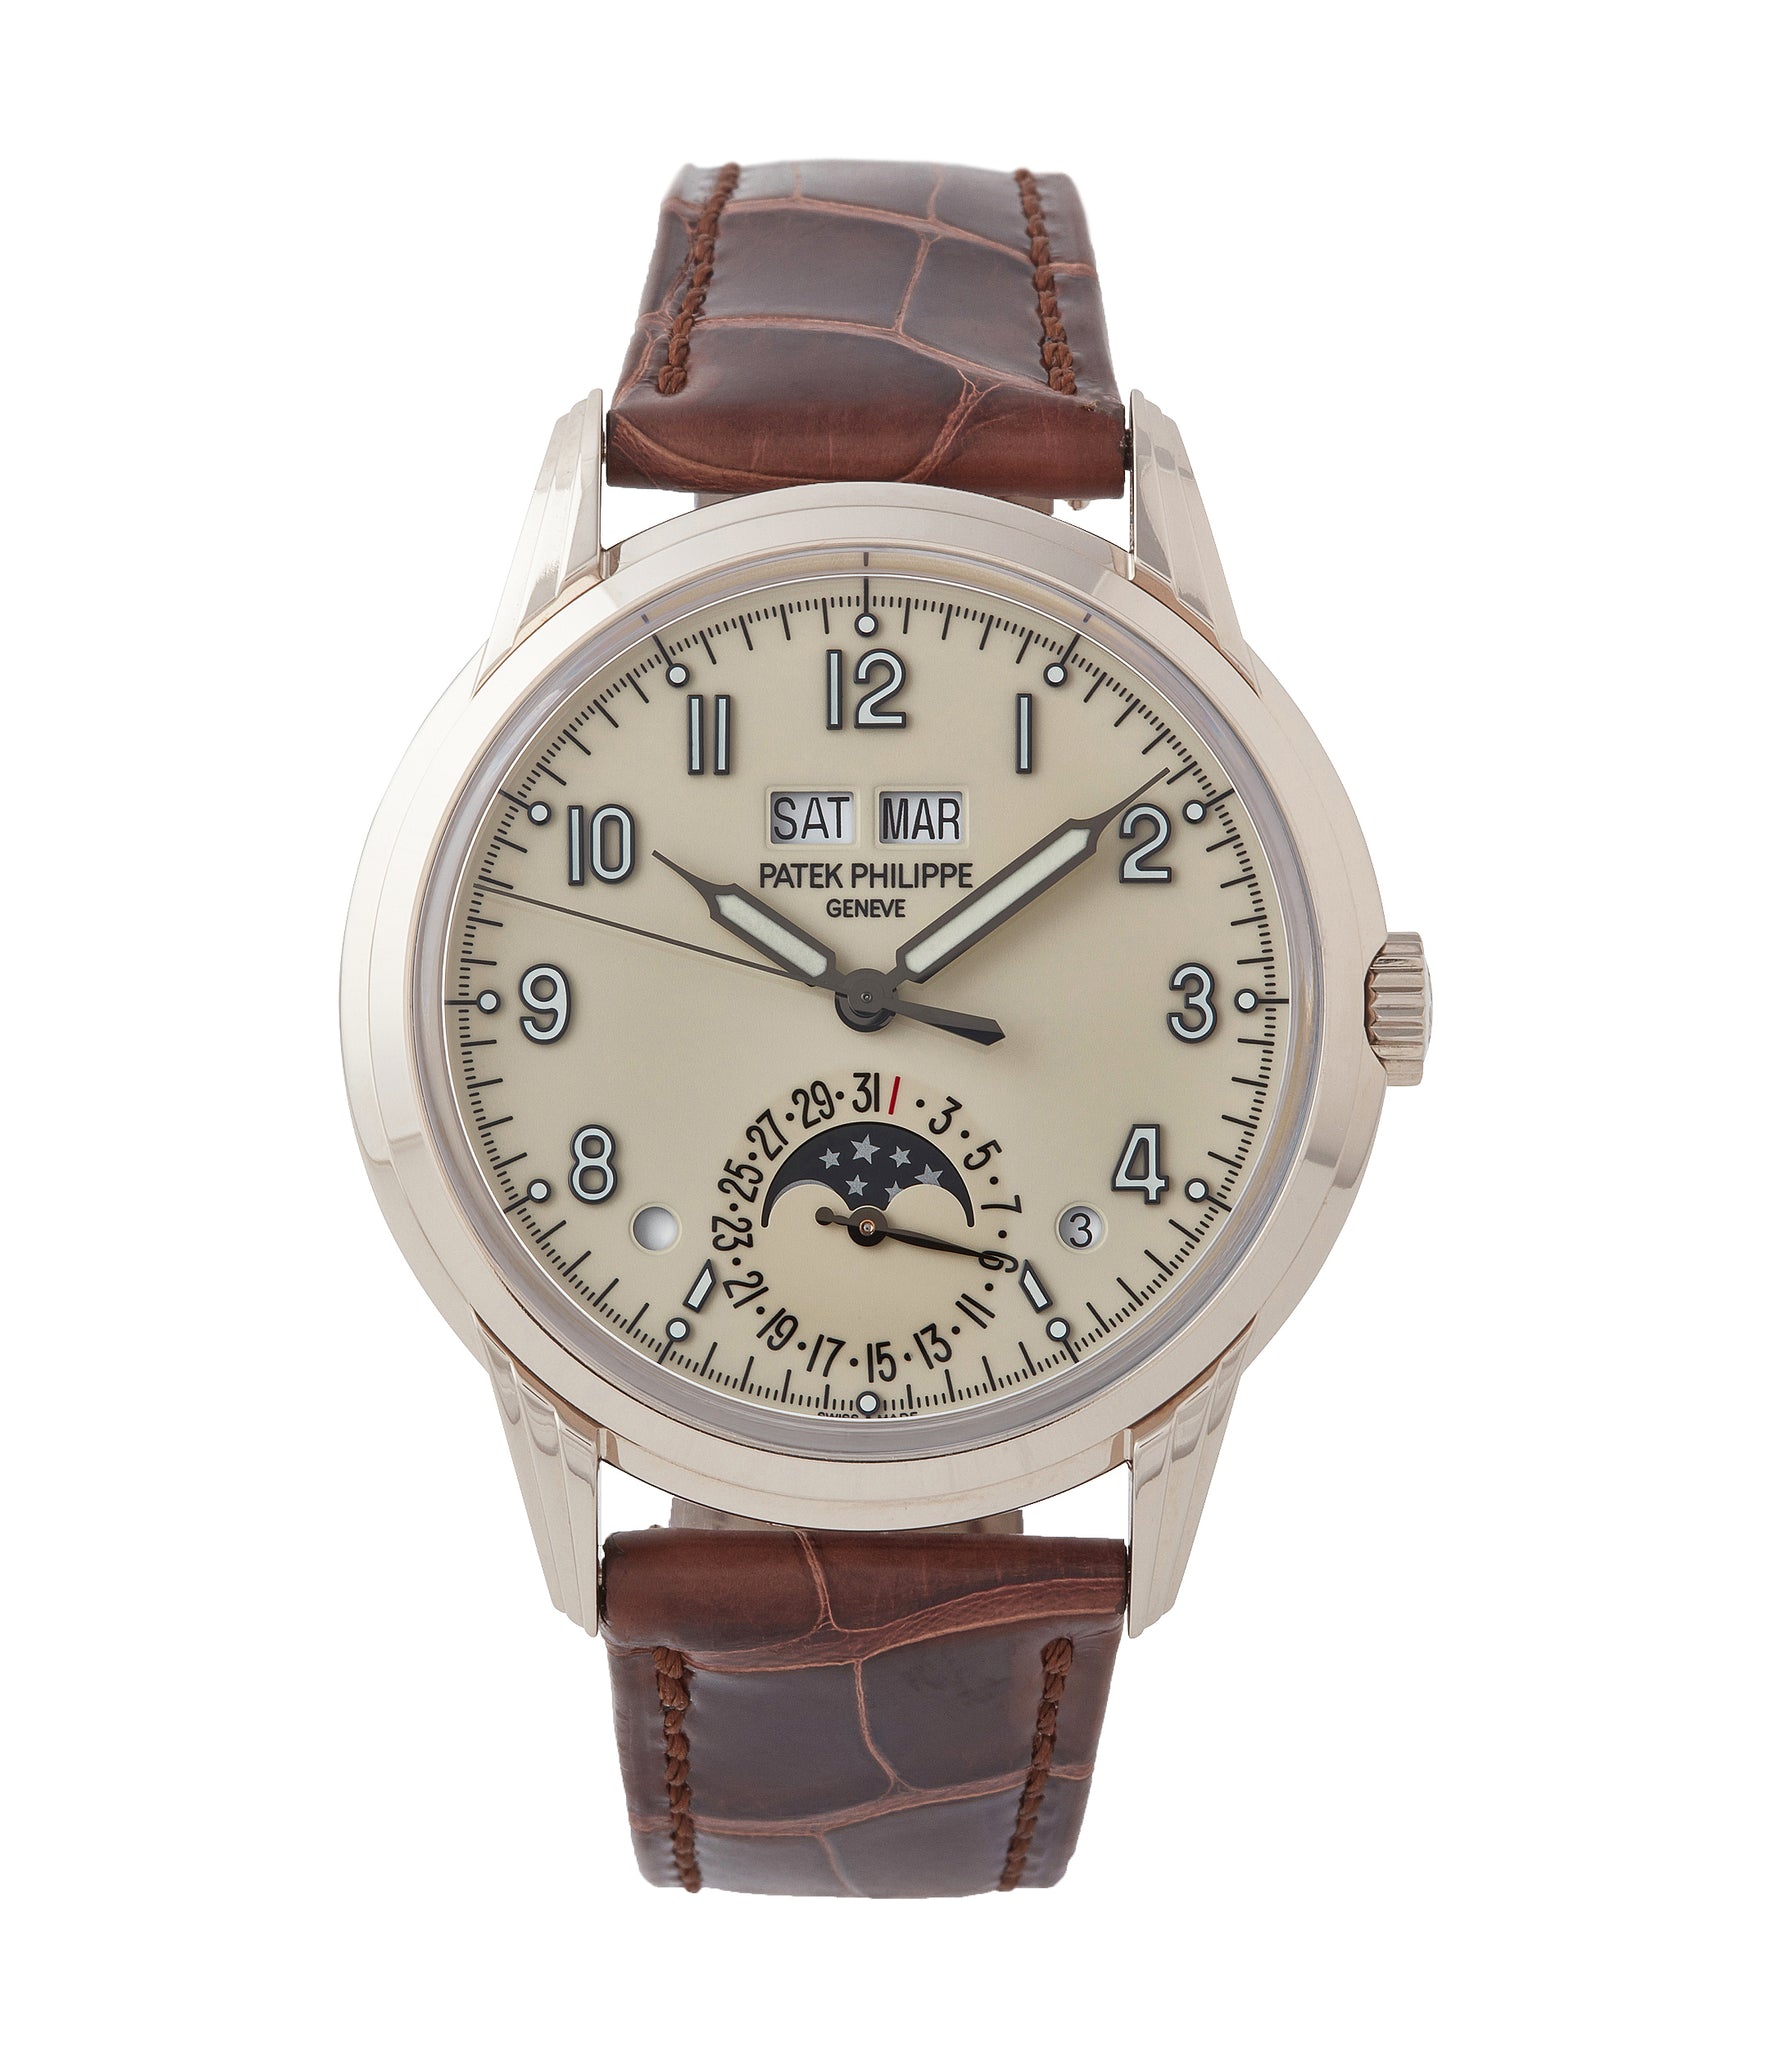 buy Patek Philippe 5320G-001 Perpetual Calendar white gold watch for sale online at A Collected Man London UK specialist of rare watches